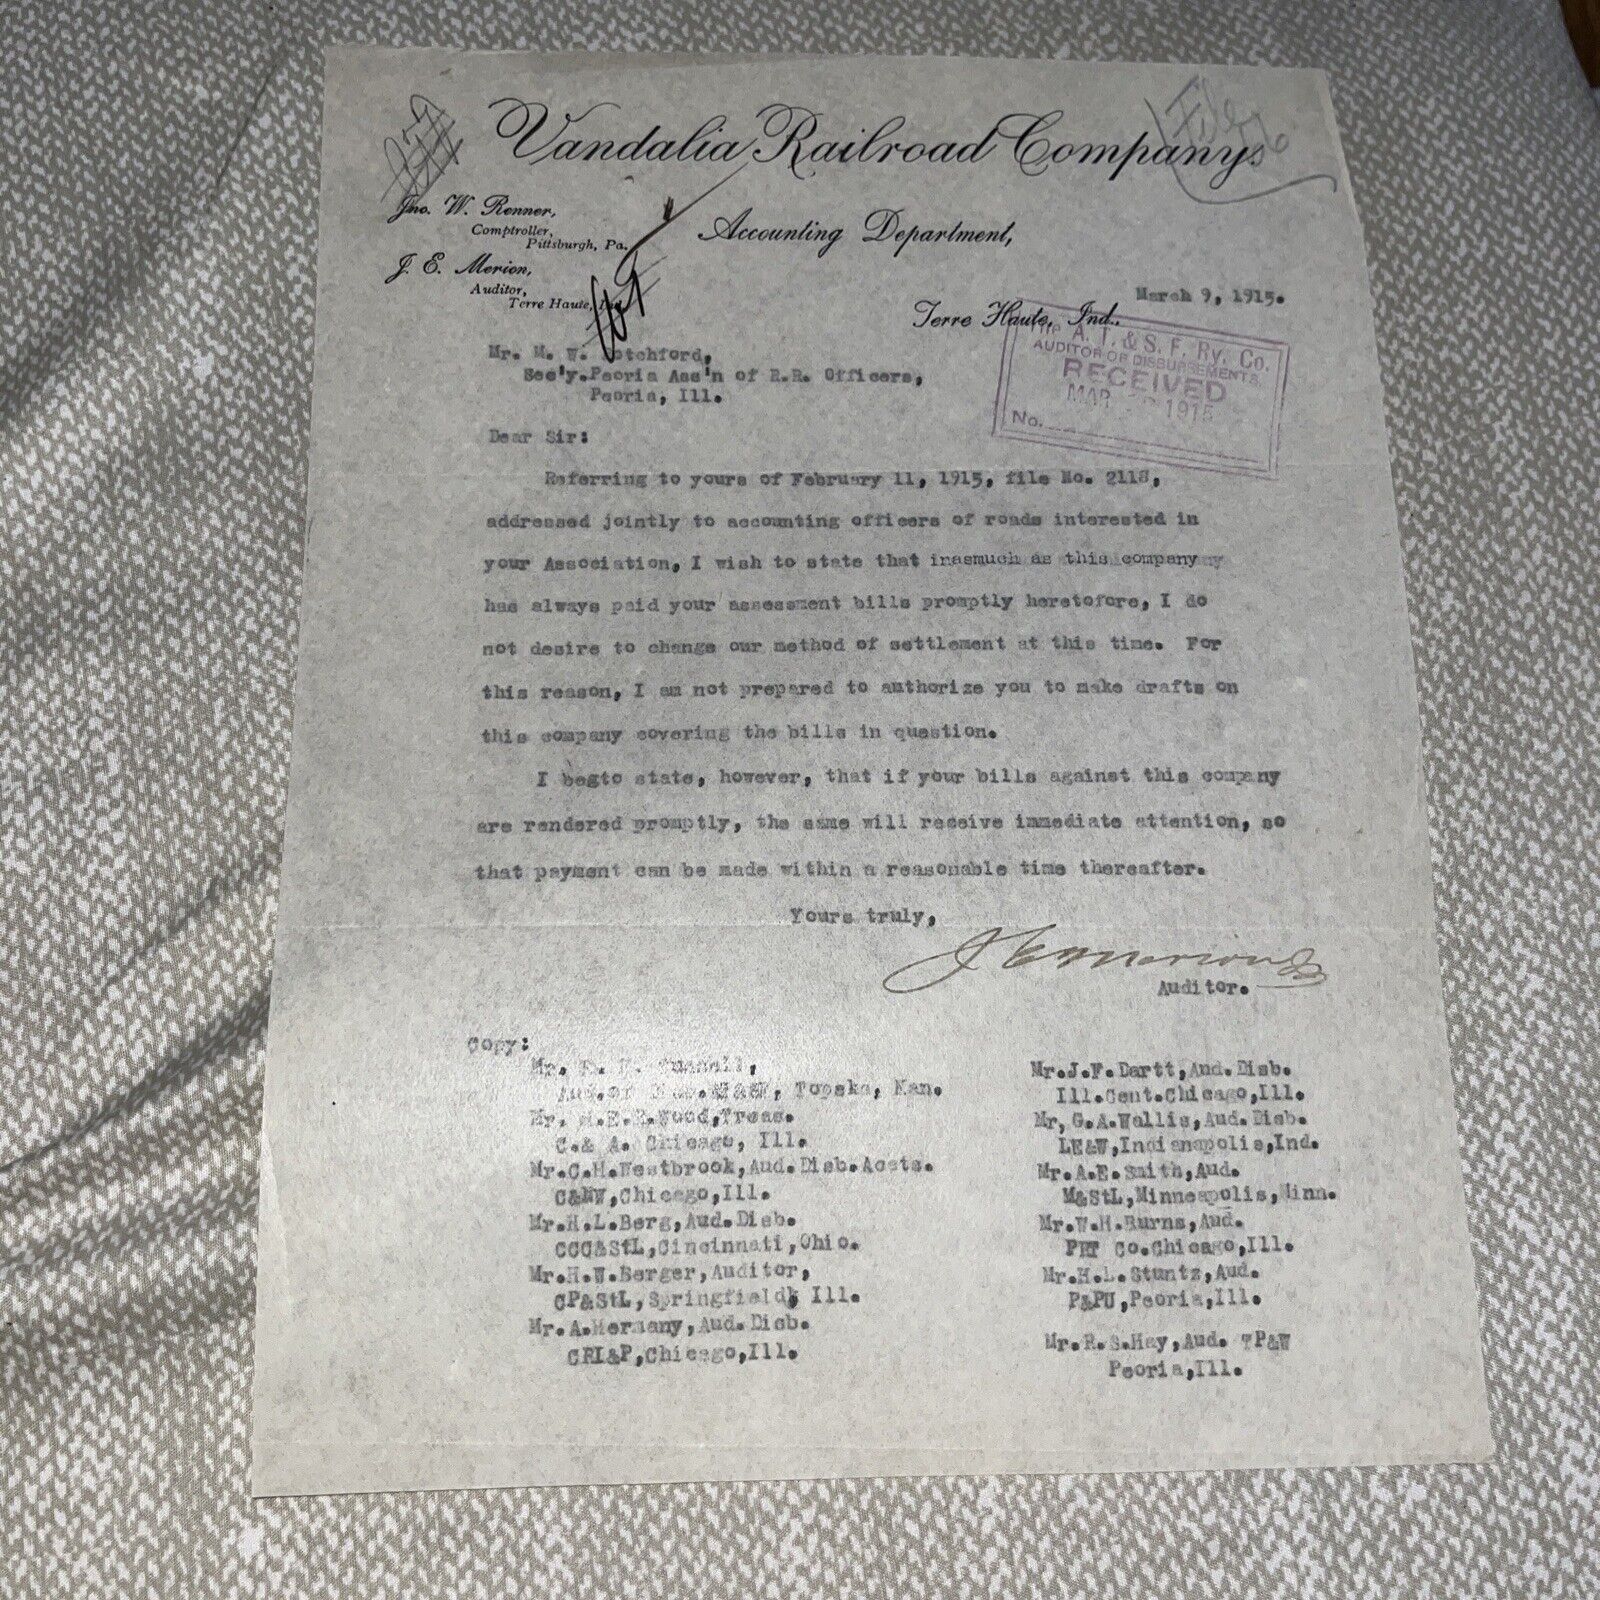 1915 Vandalia Auditor Letter to Sec’y Peoria Association of Railroad Officers